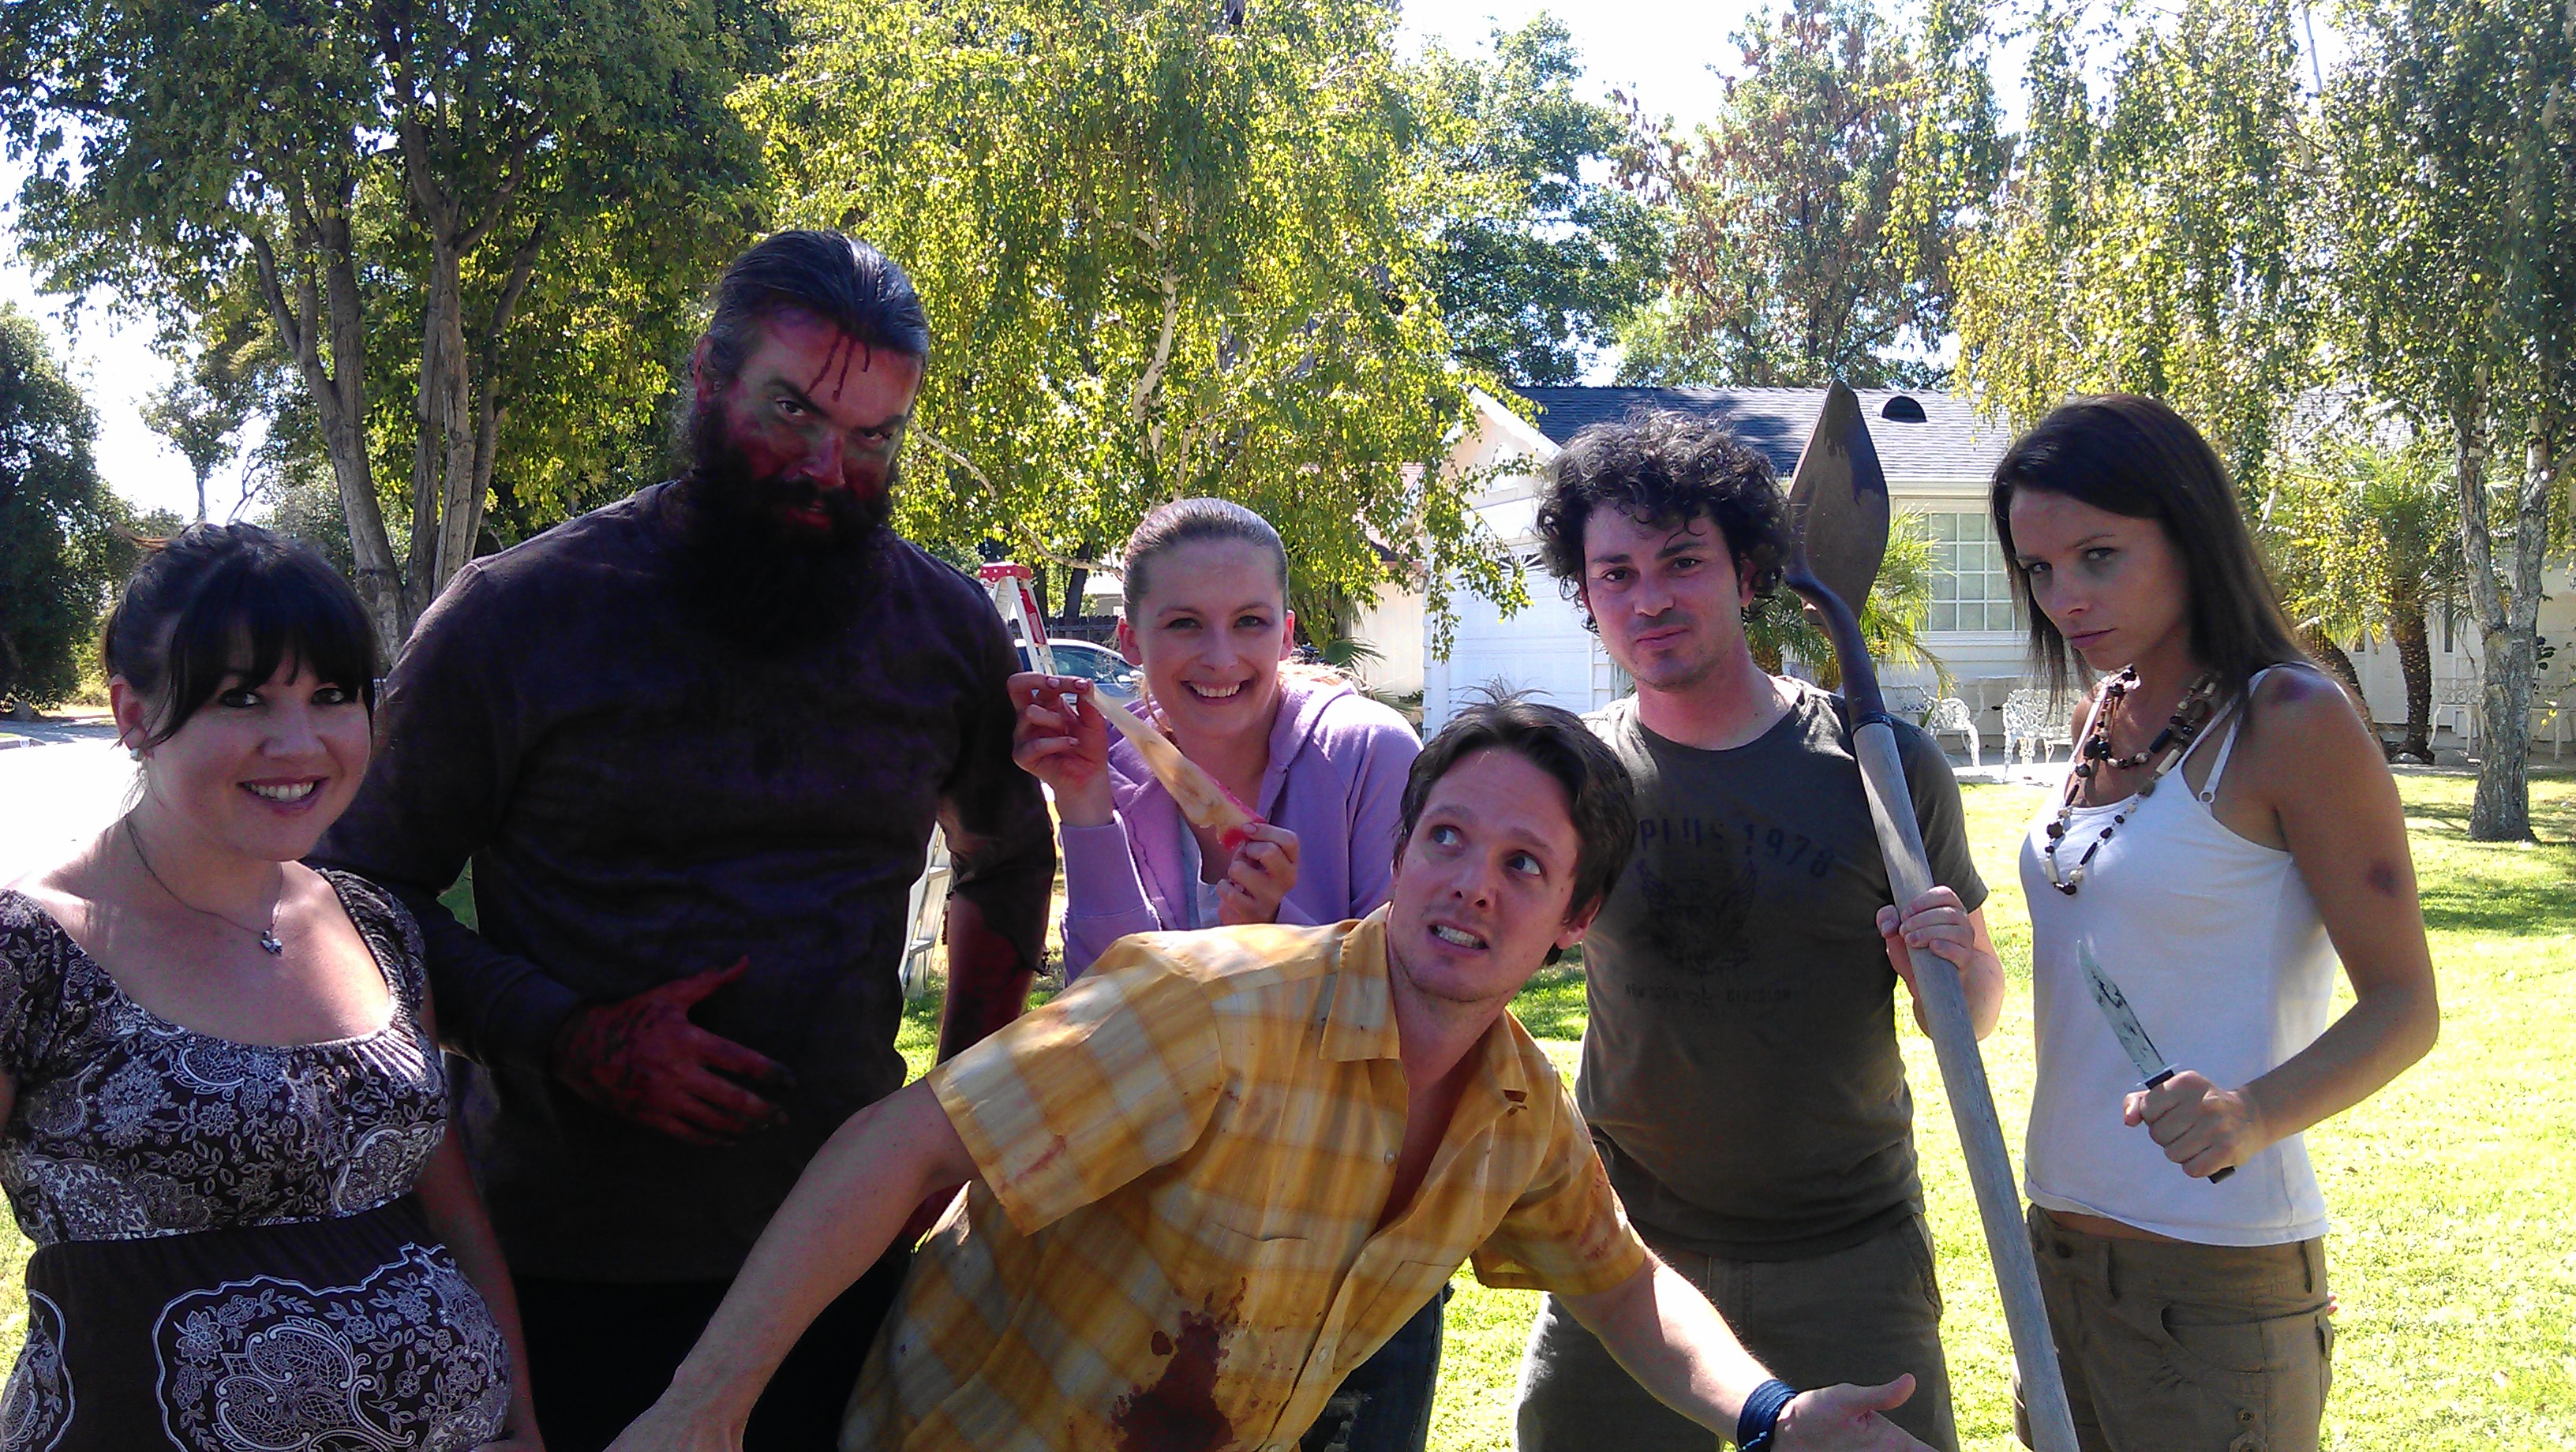 The cast of 'Blood Rush' plus zombie.